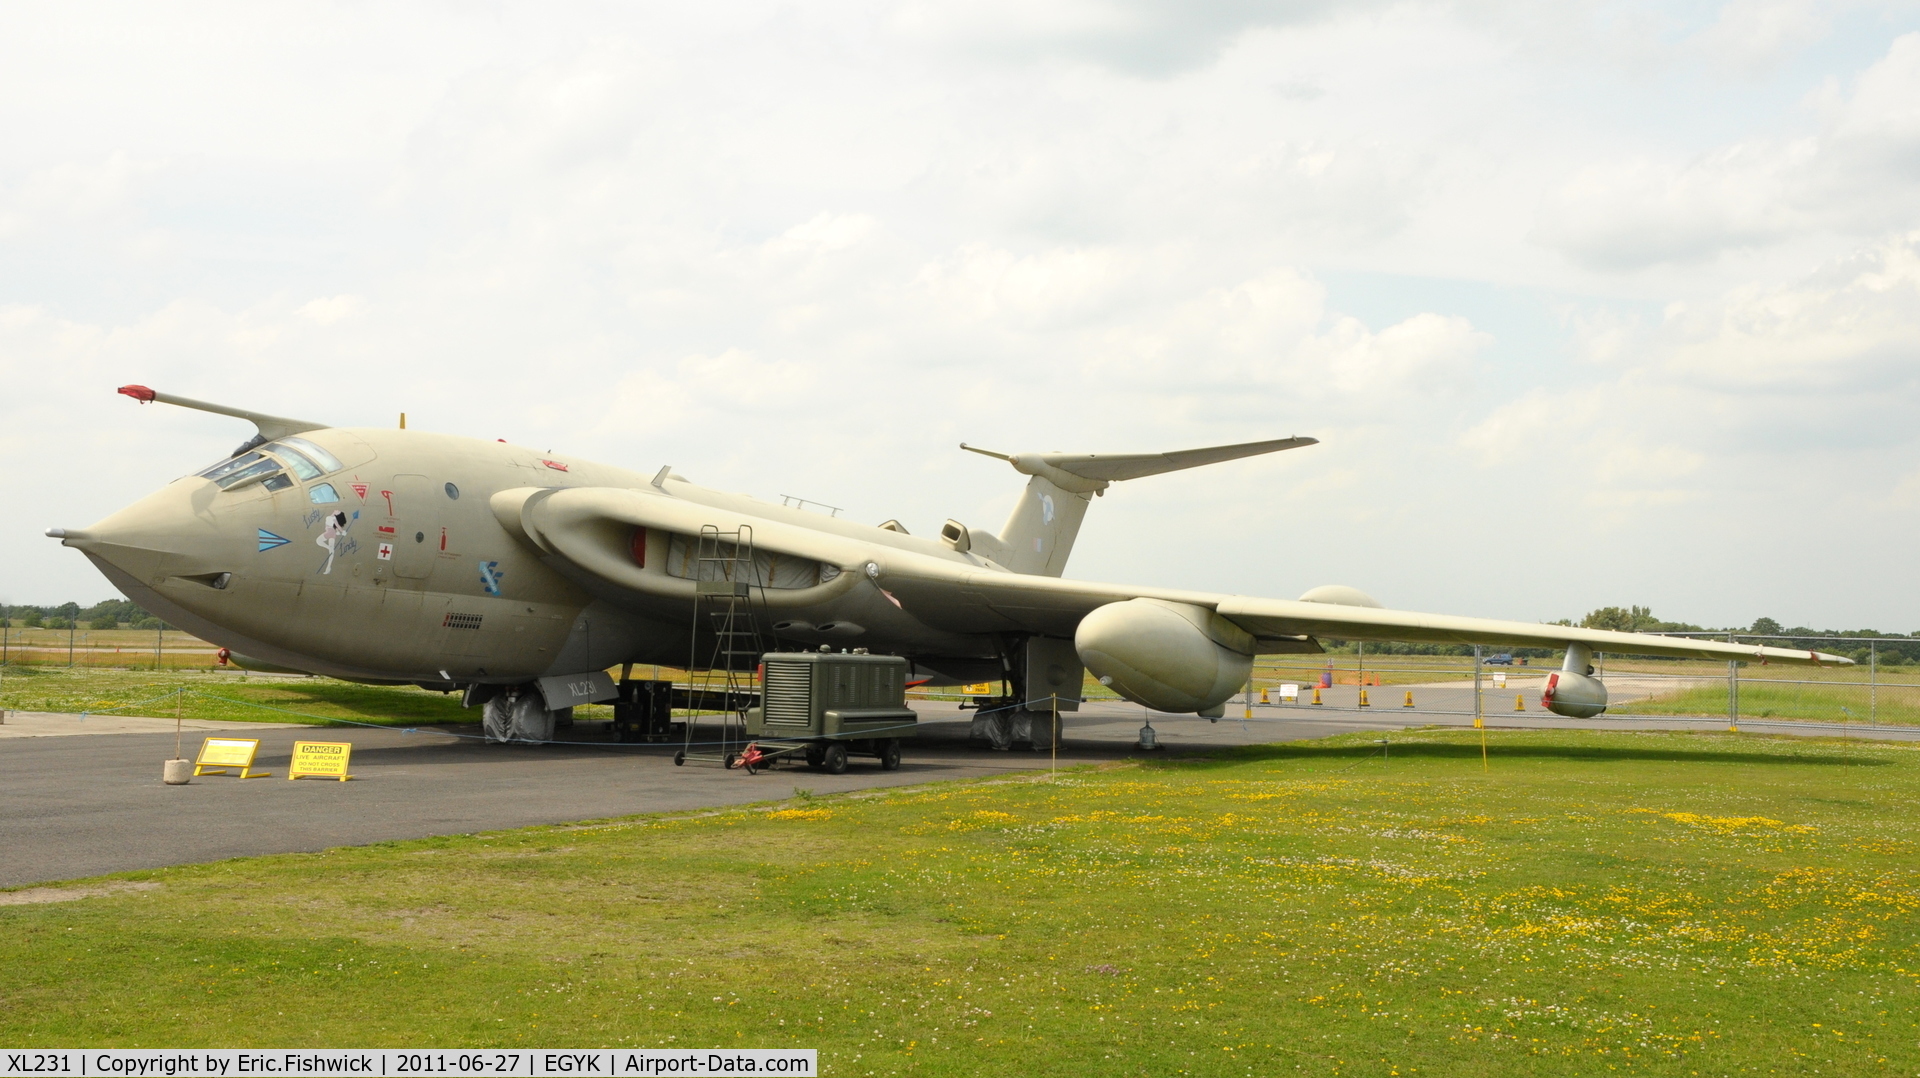 XL231, 1962 Handley Page Victor K.2 C/N HP80/76, XL231 at Yorkshire Air Museum